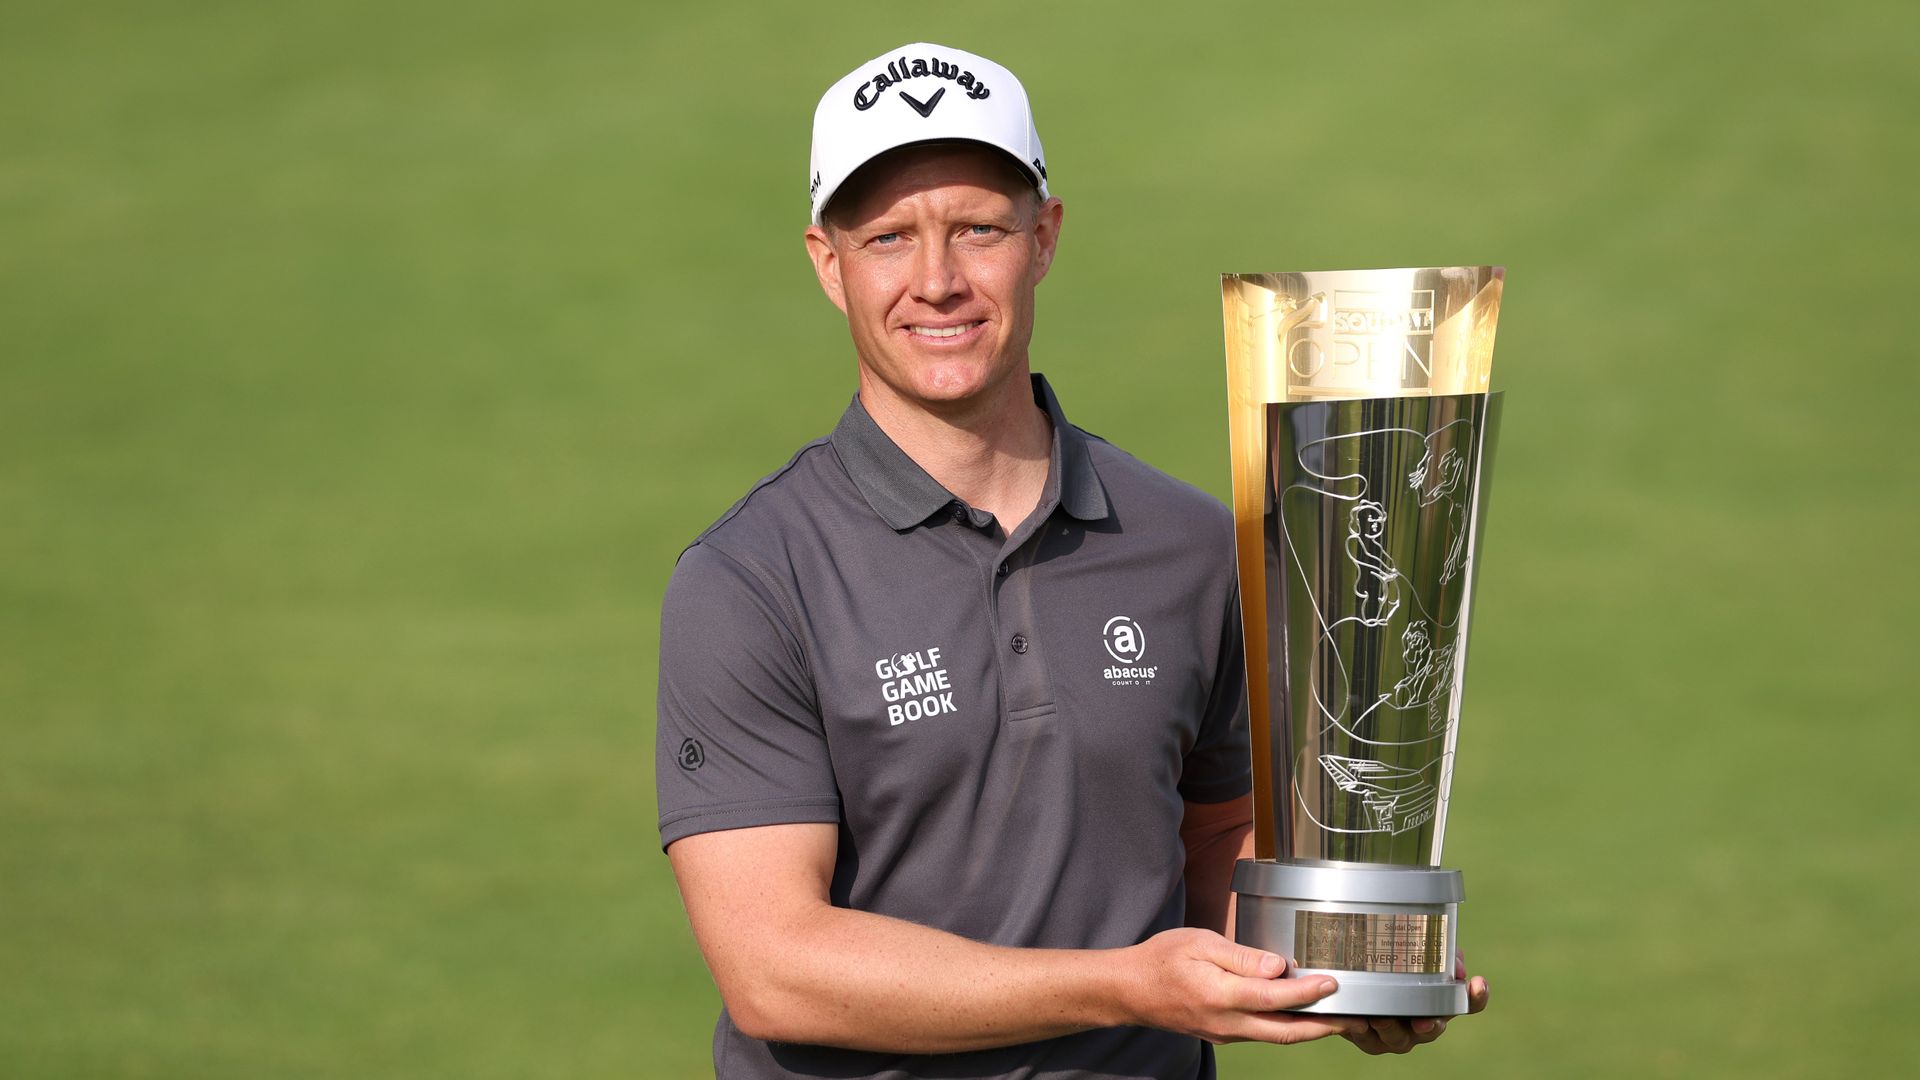 Sweden's Forsstrom holds on to claim maiden DP World Tour title